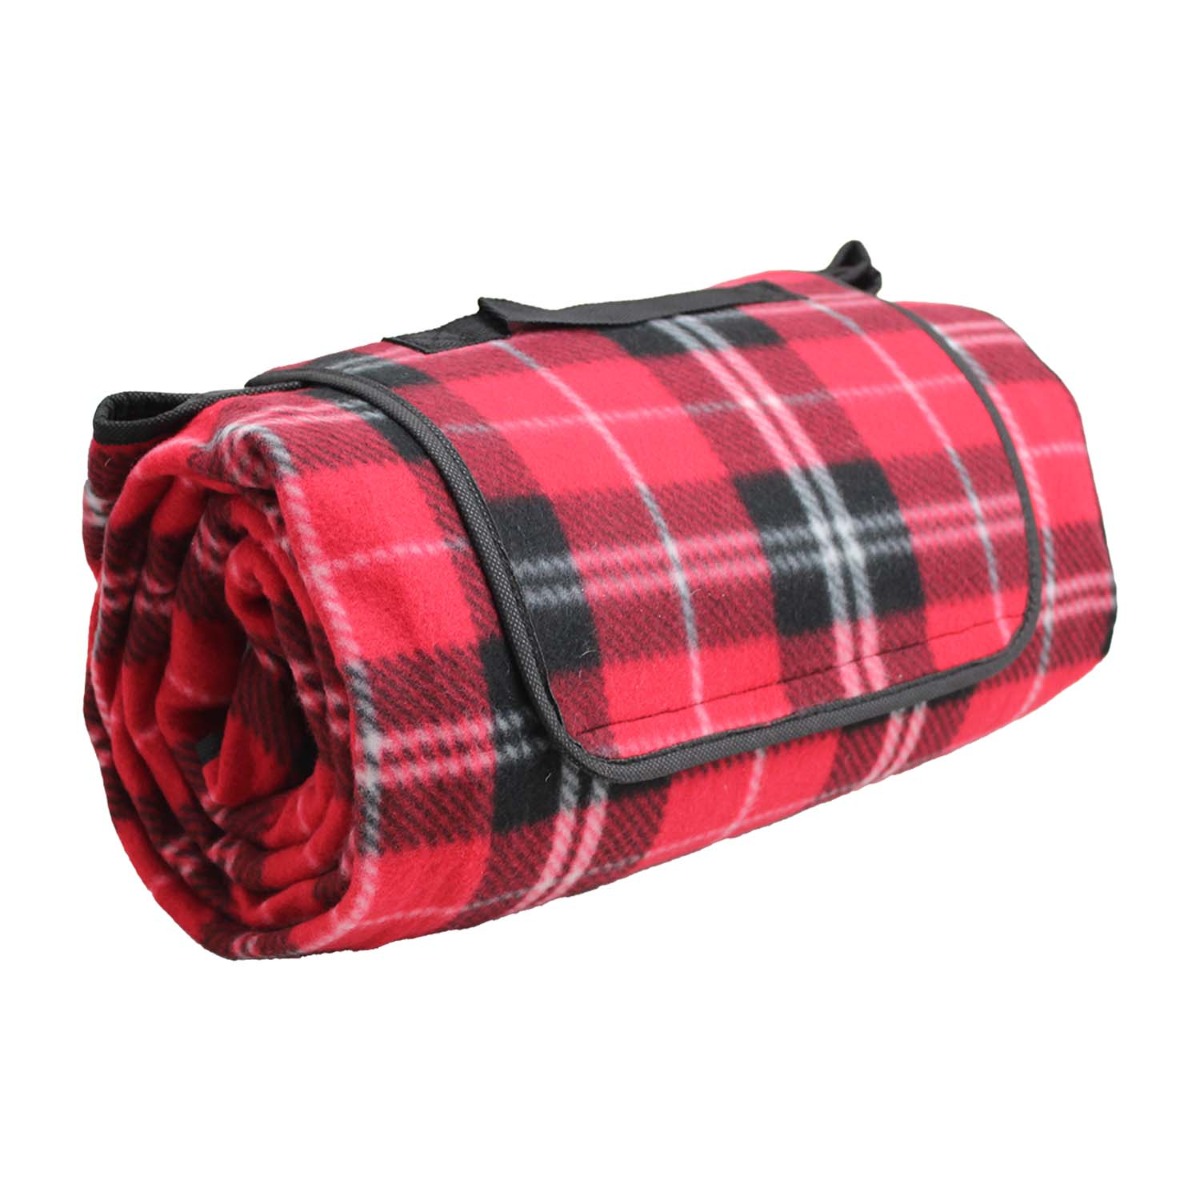 PICNIC RUG LARGE 150X200 WITH PVC BACKING